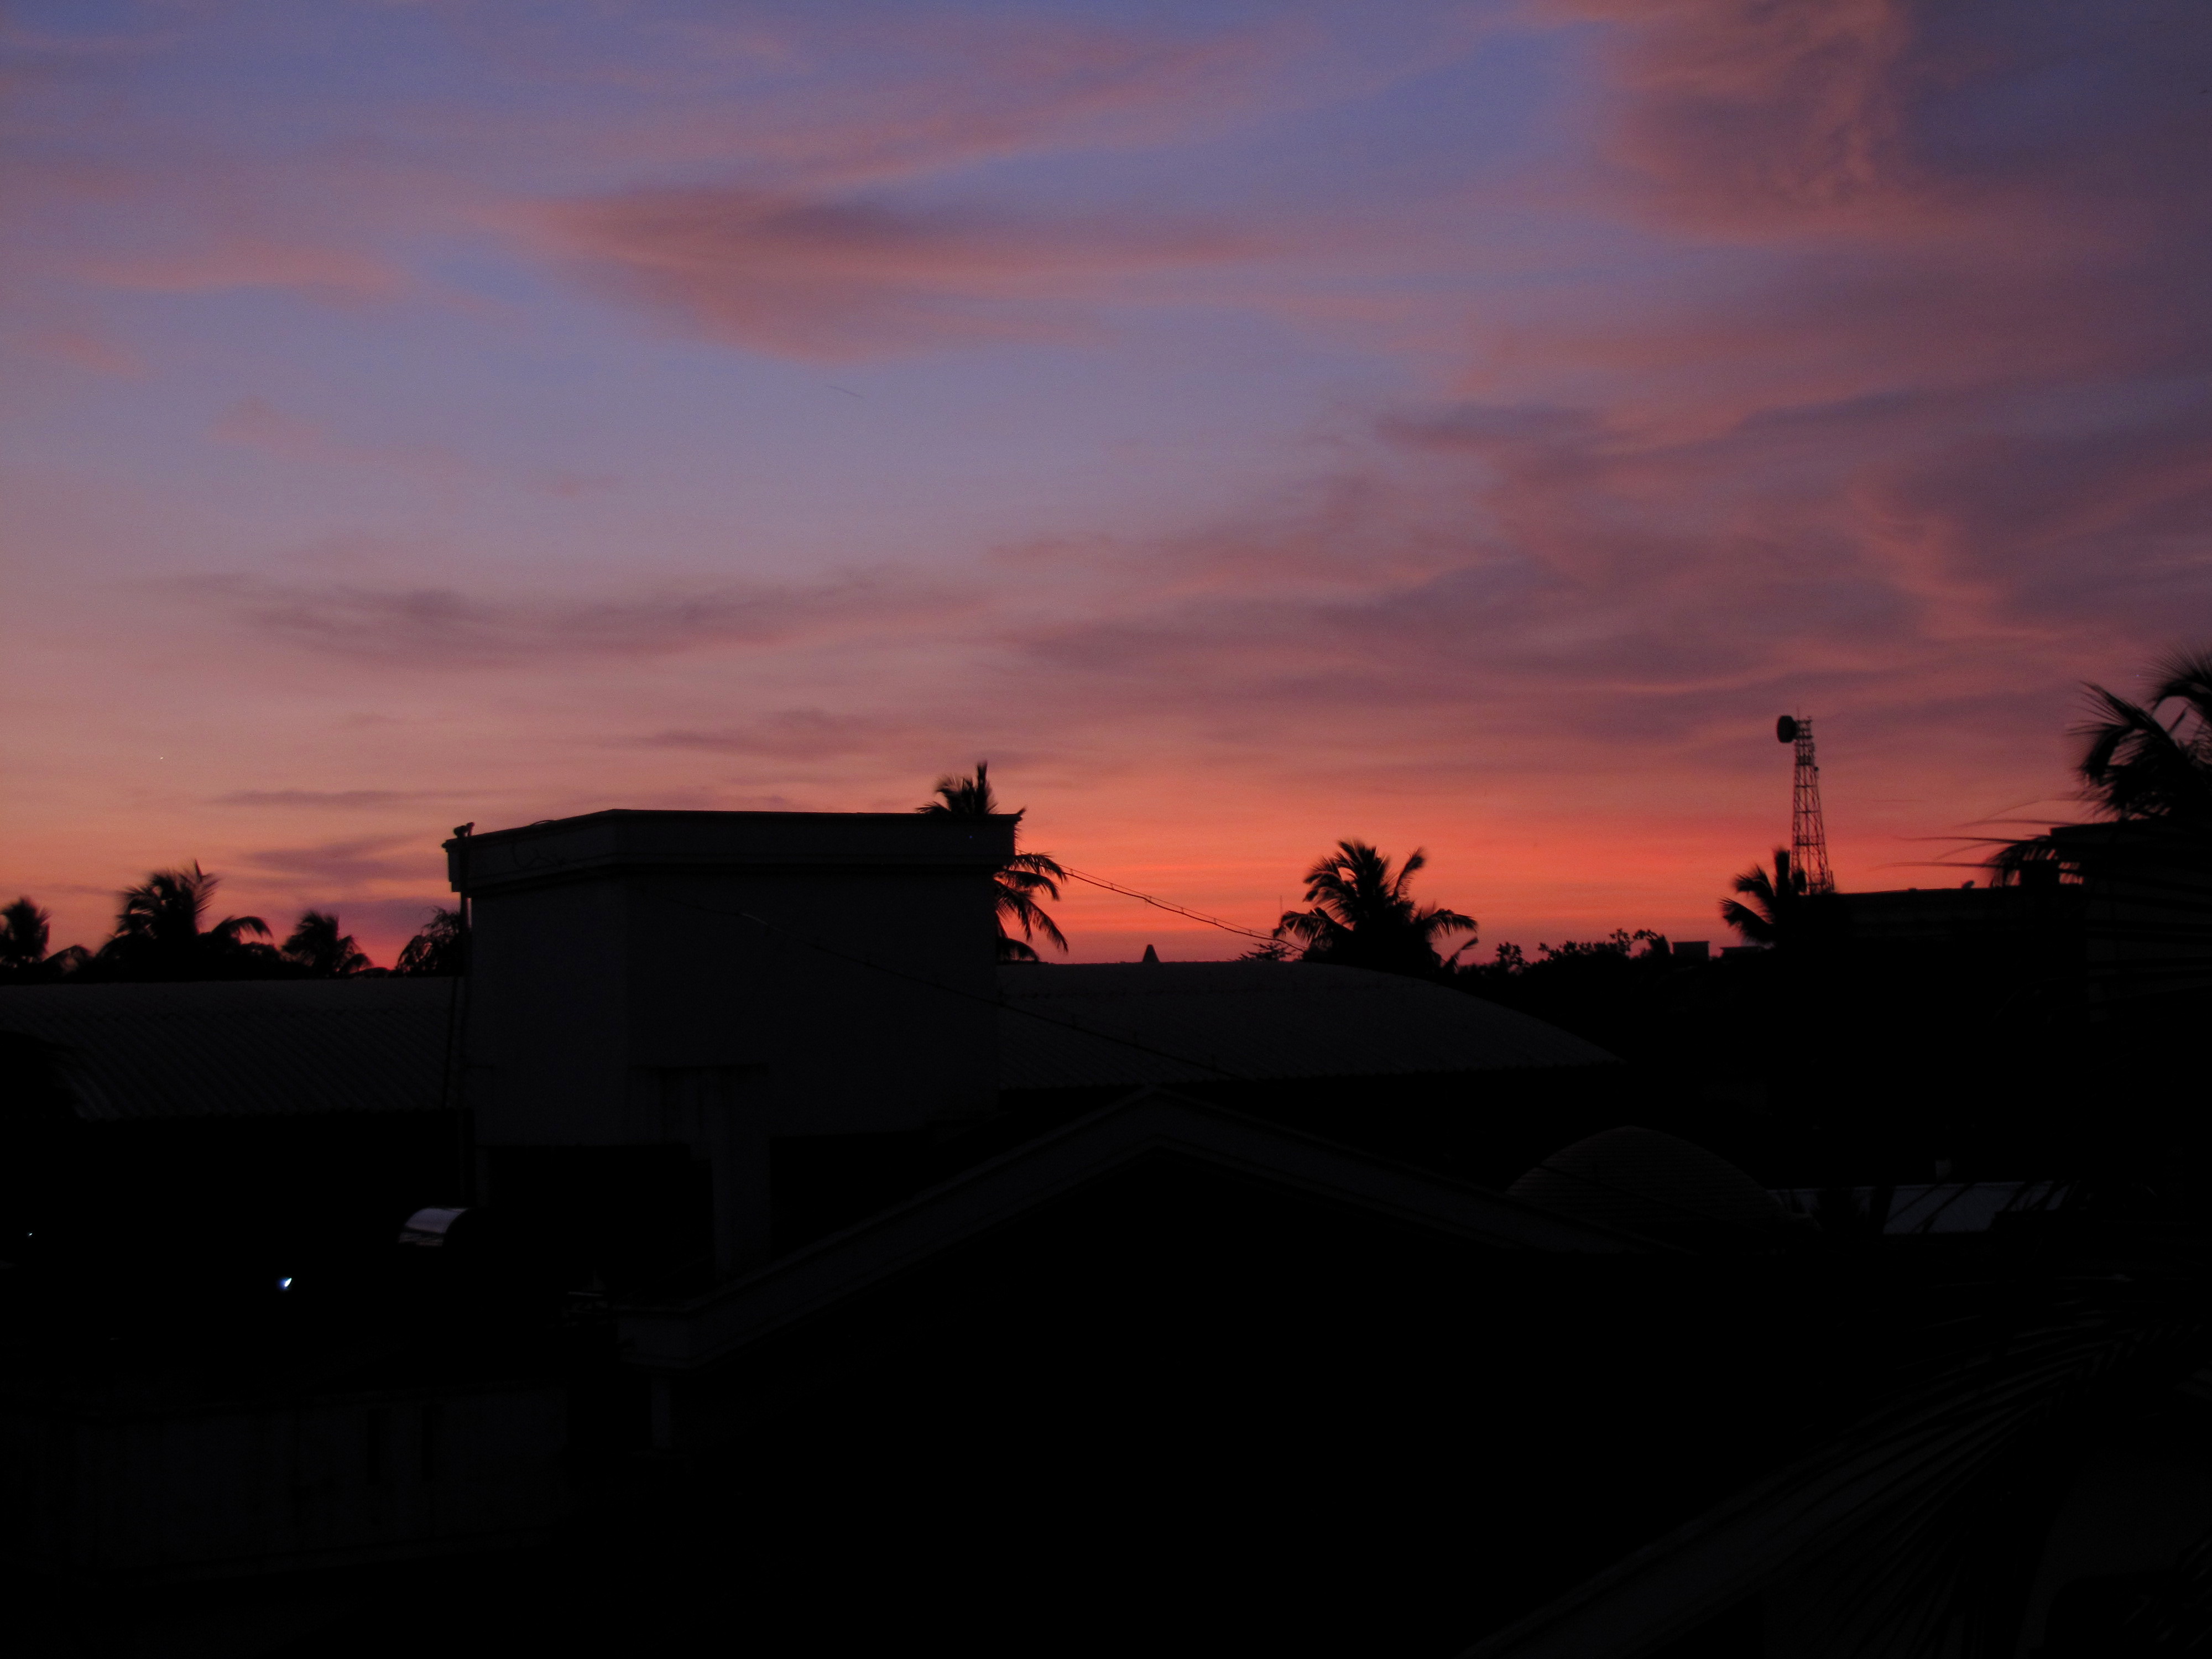 File:Twilight View From Mangalore.jpg - Wikimedia Commons